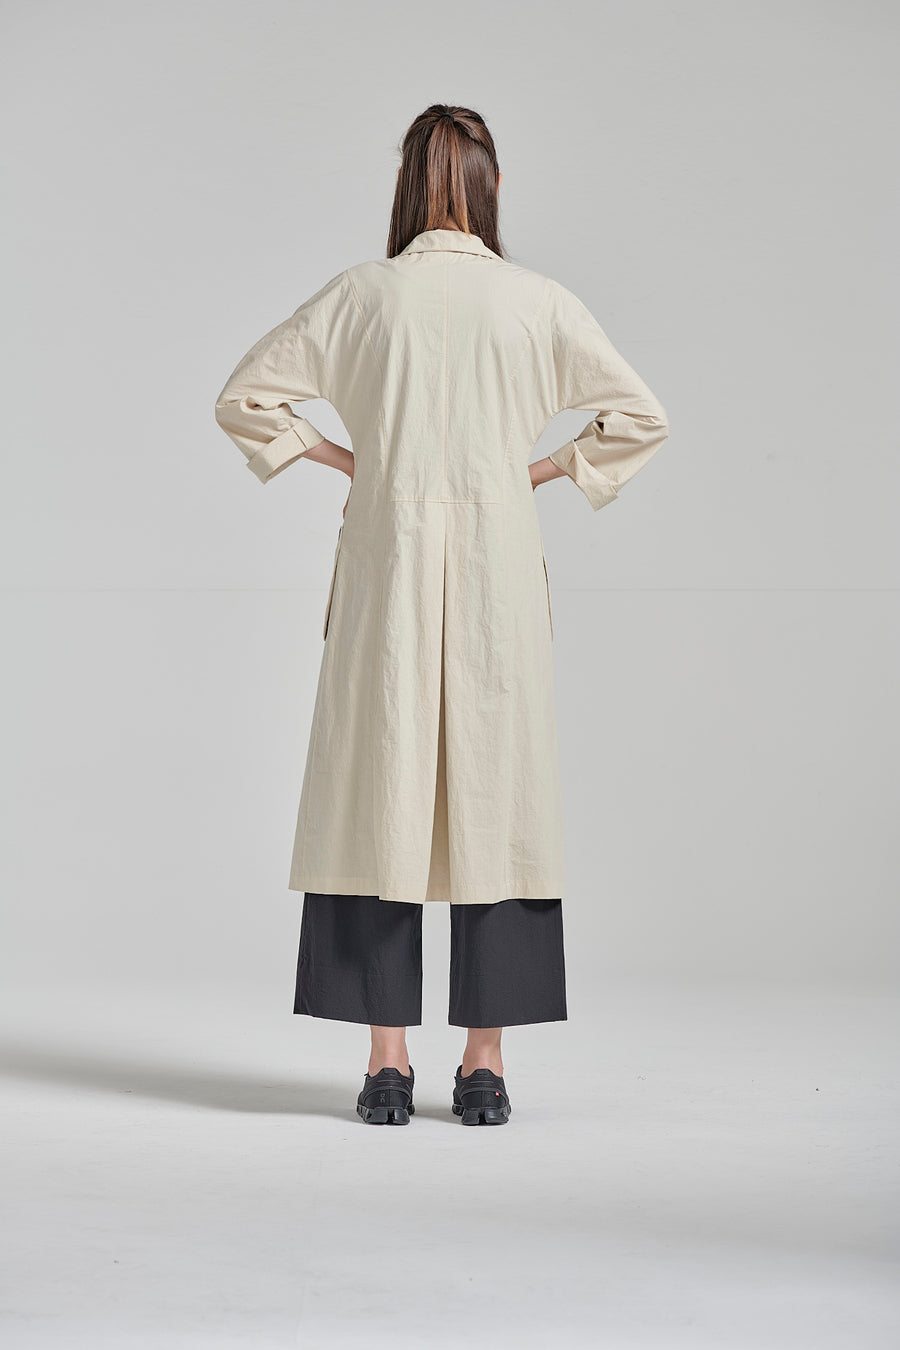 Coat dress from refined pure cotton